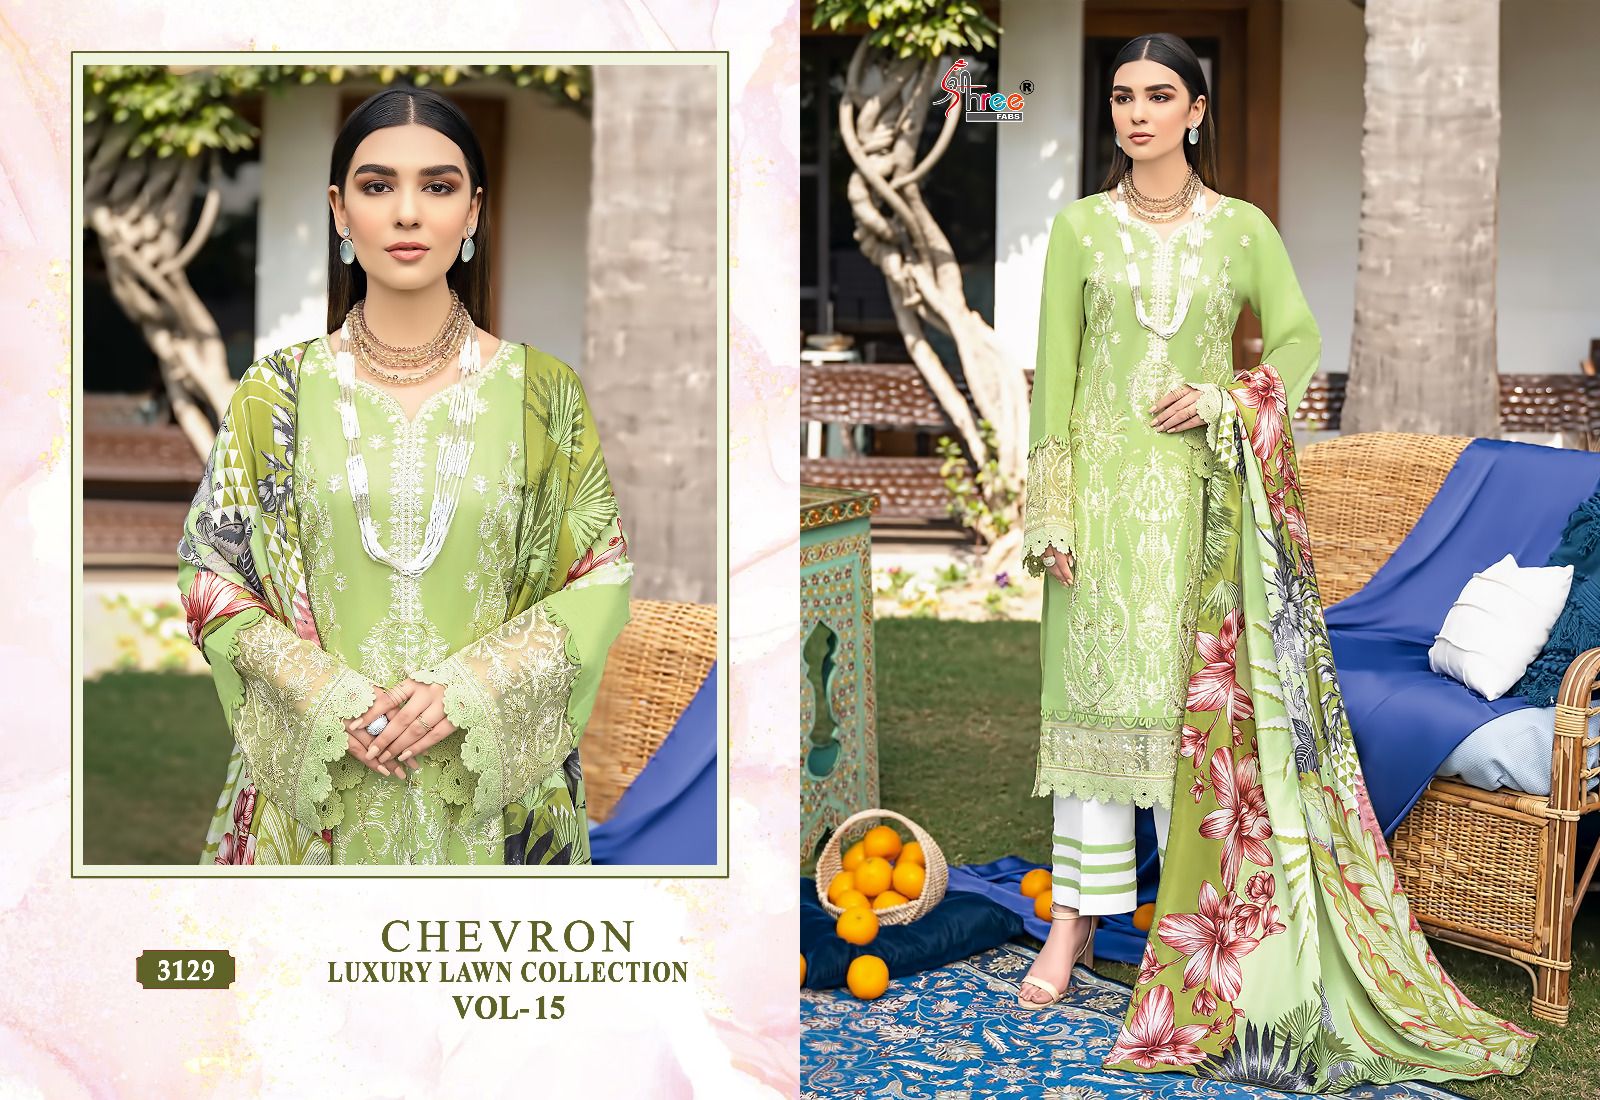 Shree Chevron Luxury Lawn Collection Vol 15 collection 3